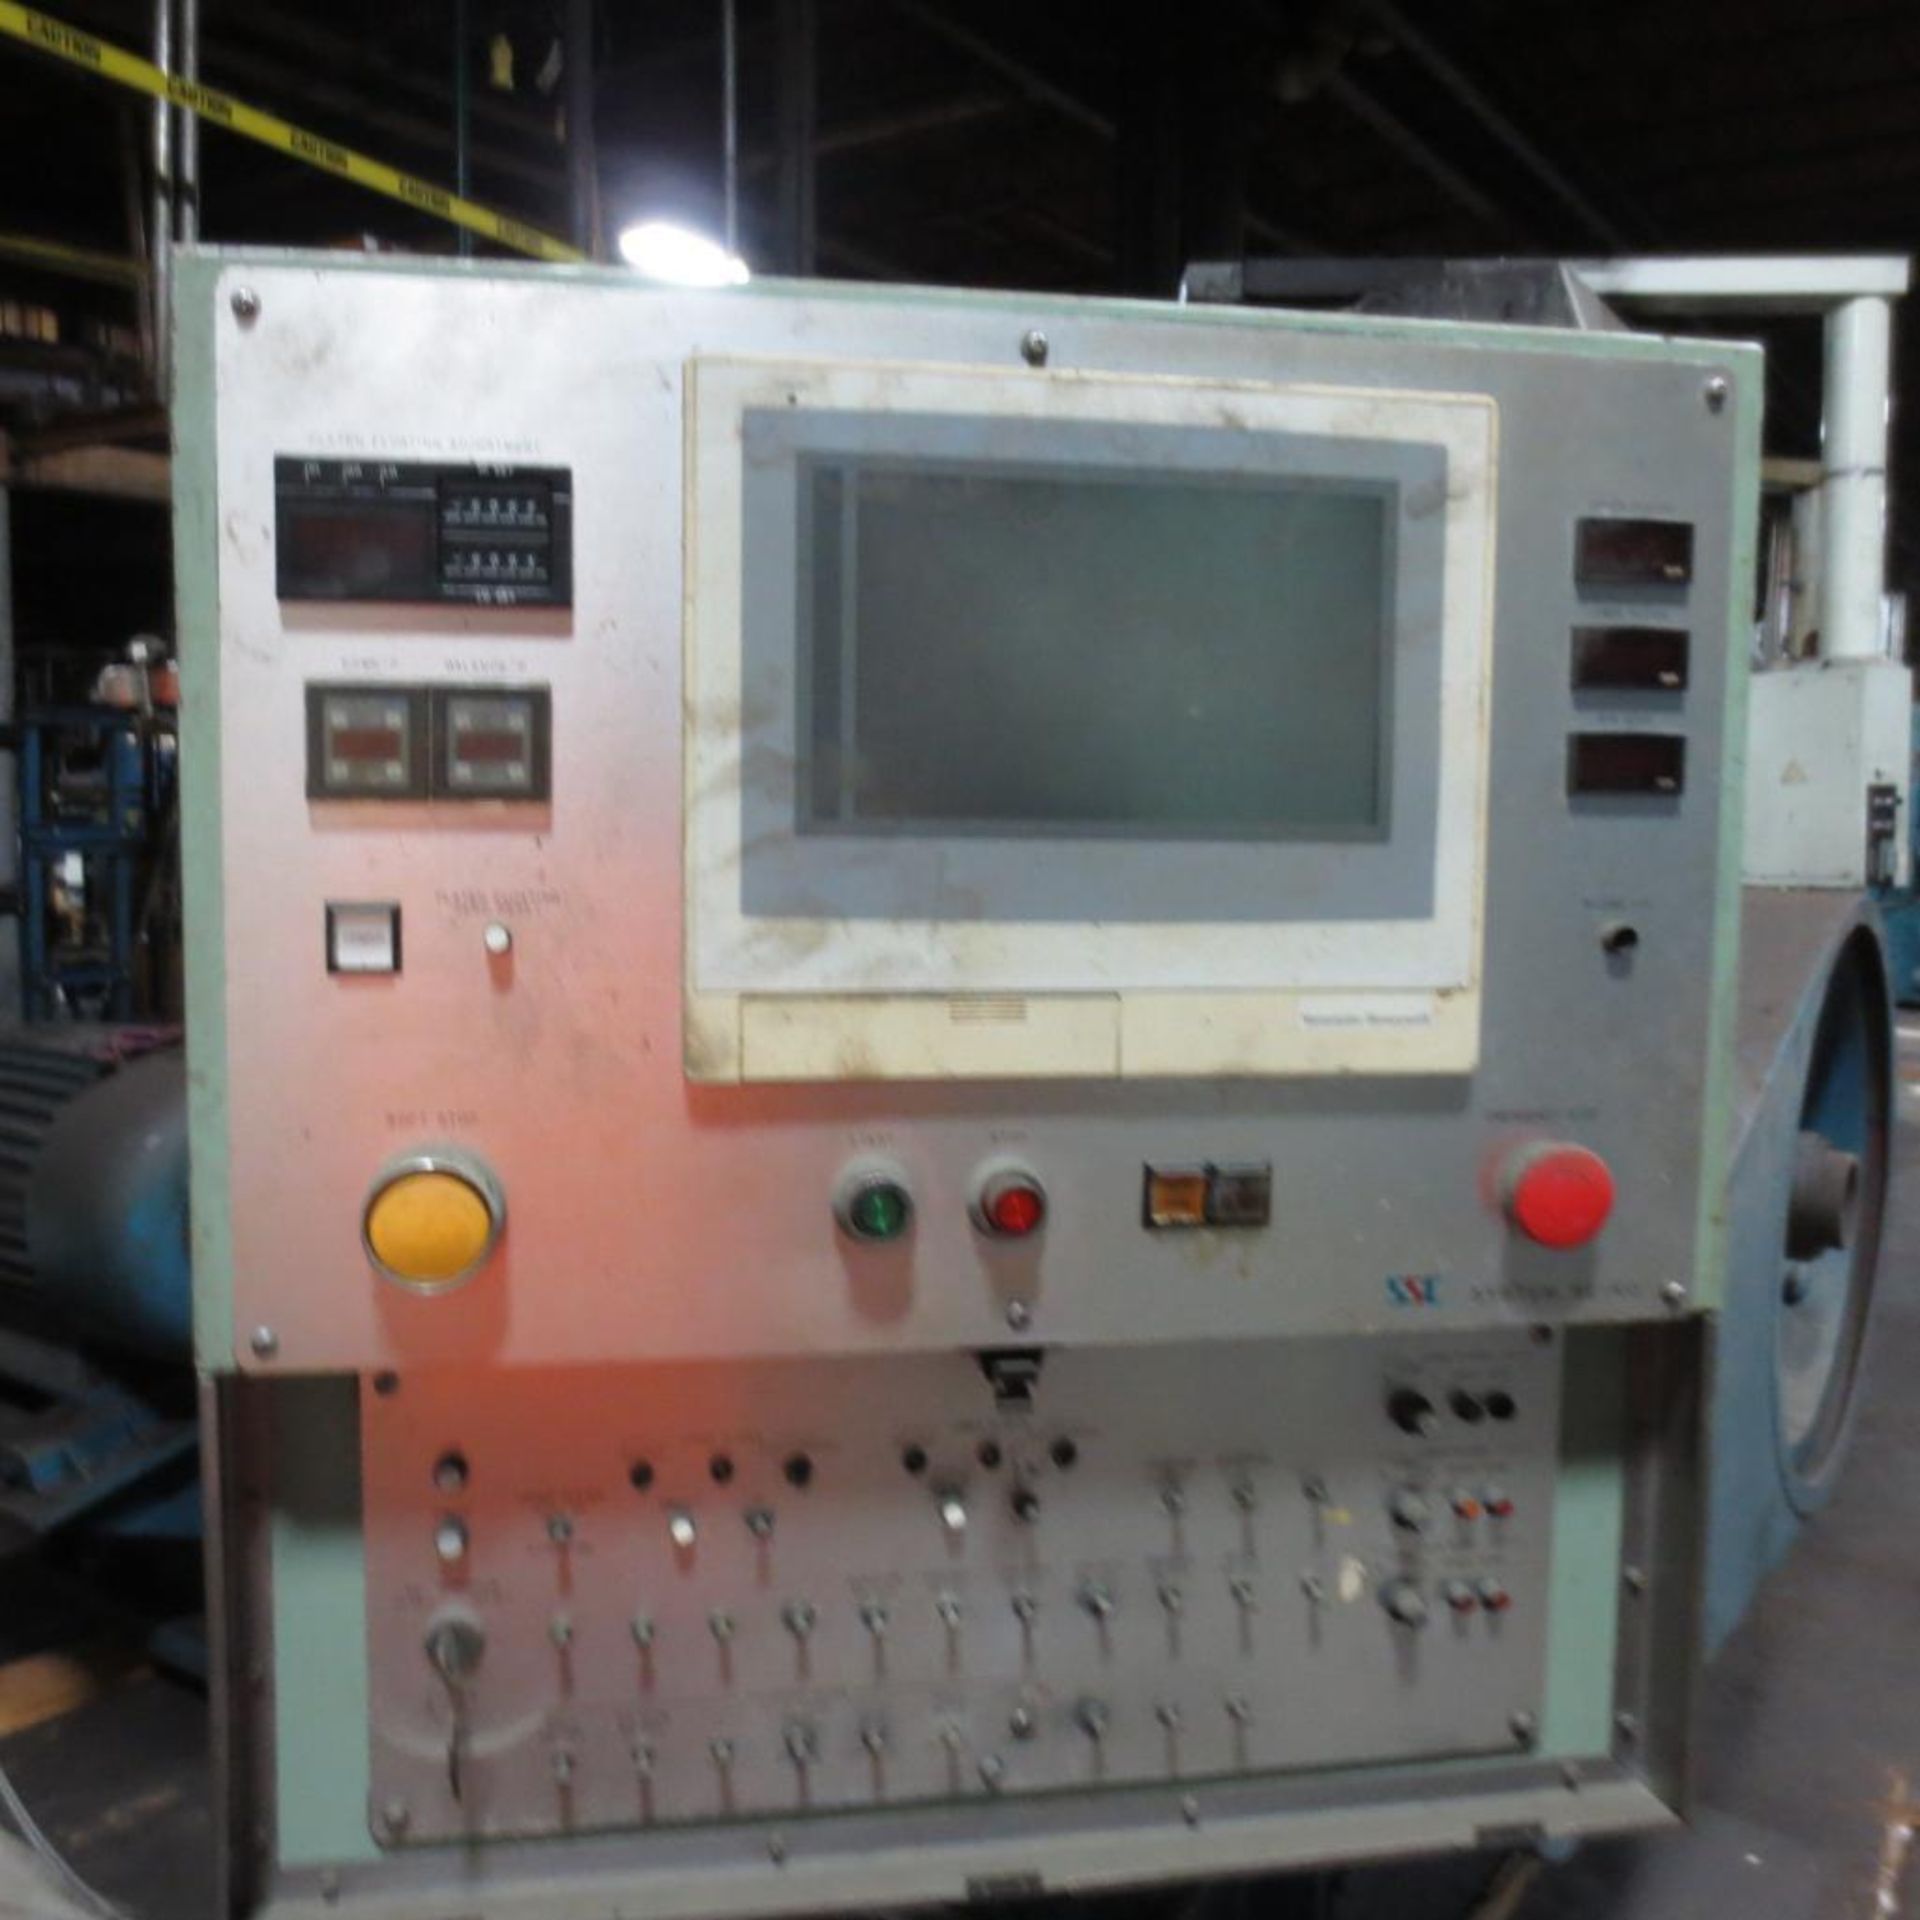 SSC System Seiko Vertical Lapping Machine S/N: 3745 (1996) CNC Control. Loading Fee is $850.00 - Image 3 of 8